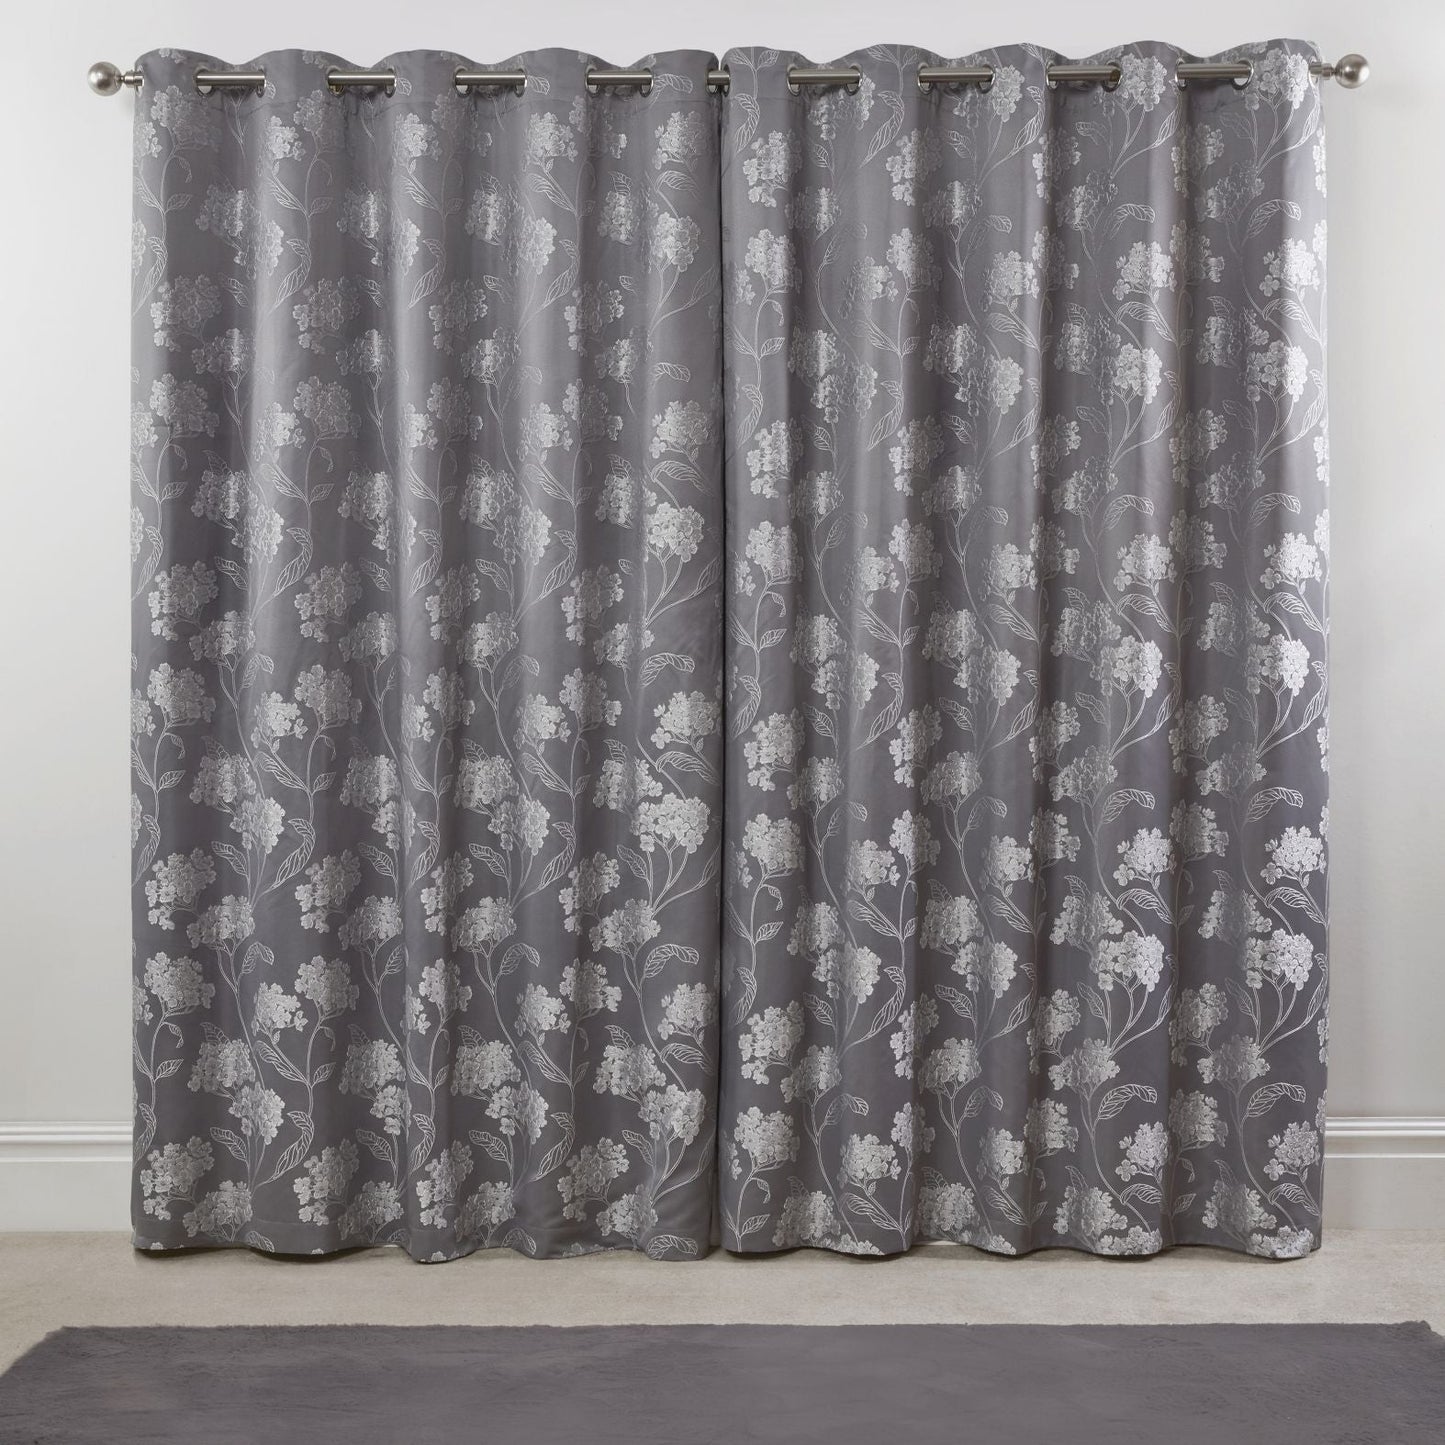 Blossom Silver Lined Eyelet Jacquard Curtains